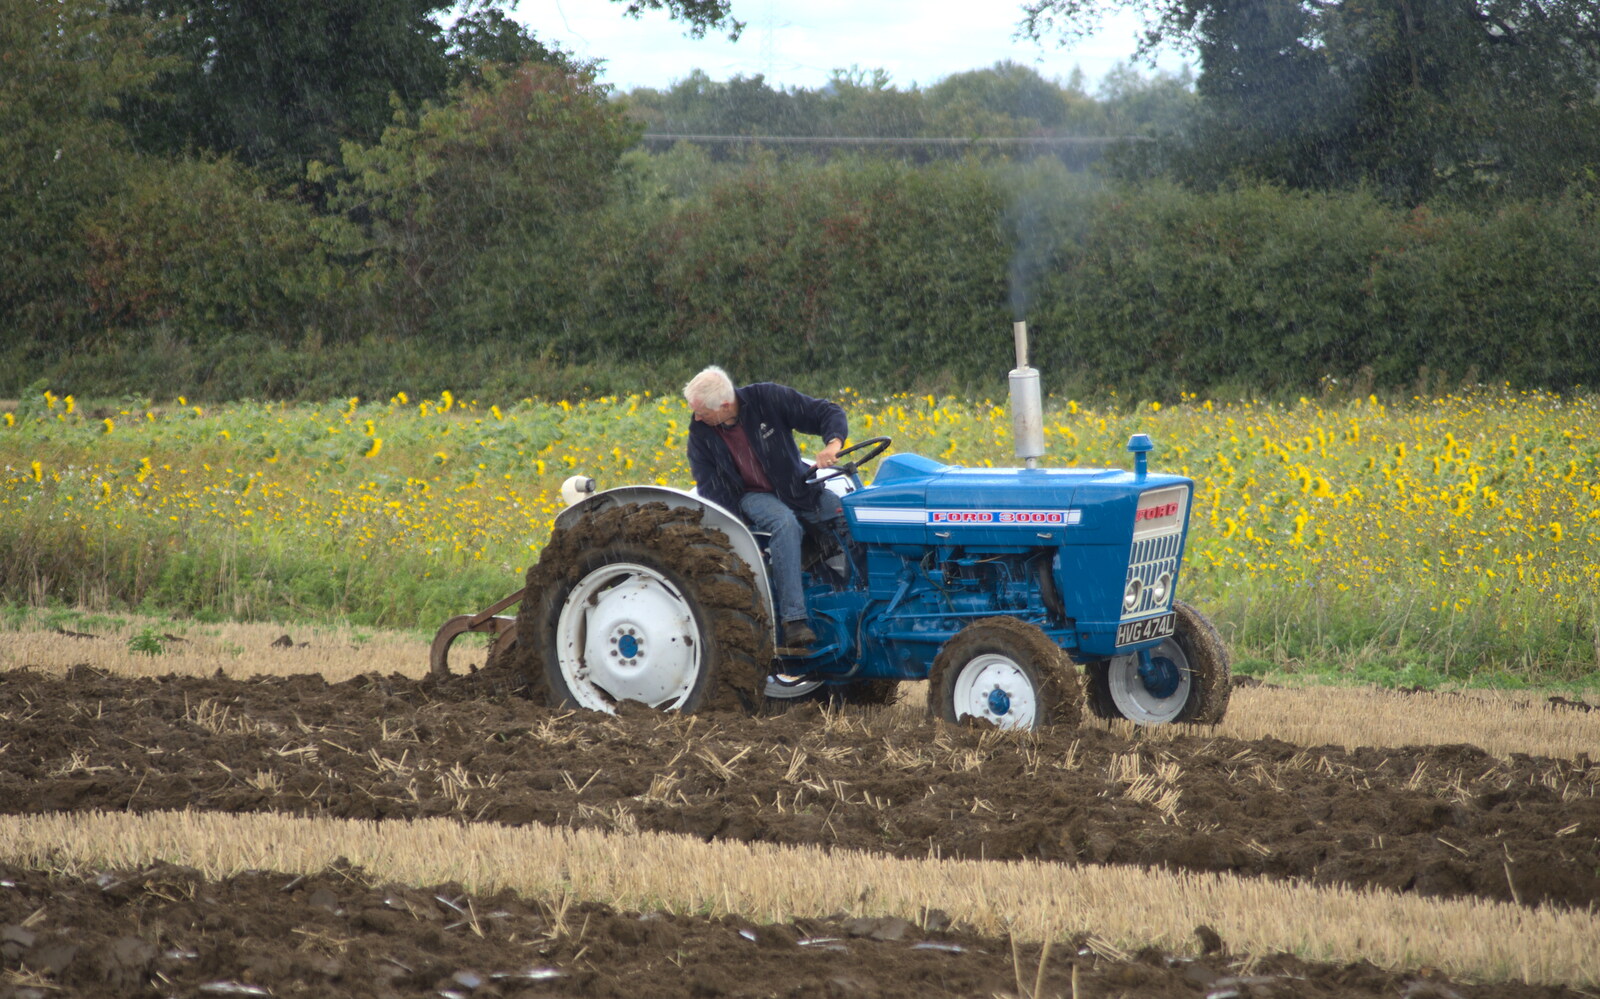 A Ford 3000 trundles around from Ploughing and Pizza, Thrandeston and Bury St. Edmunds, Suffolk - 17th September 2017